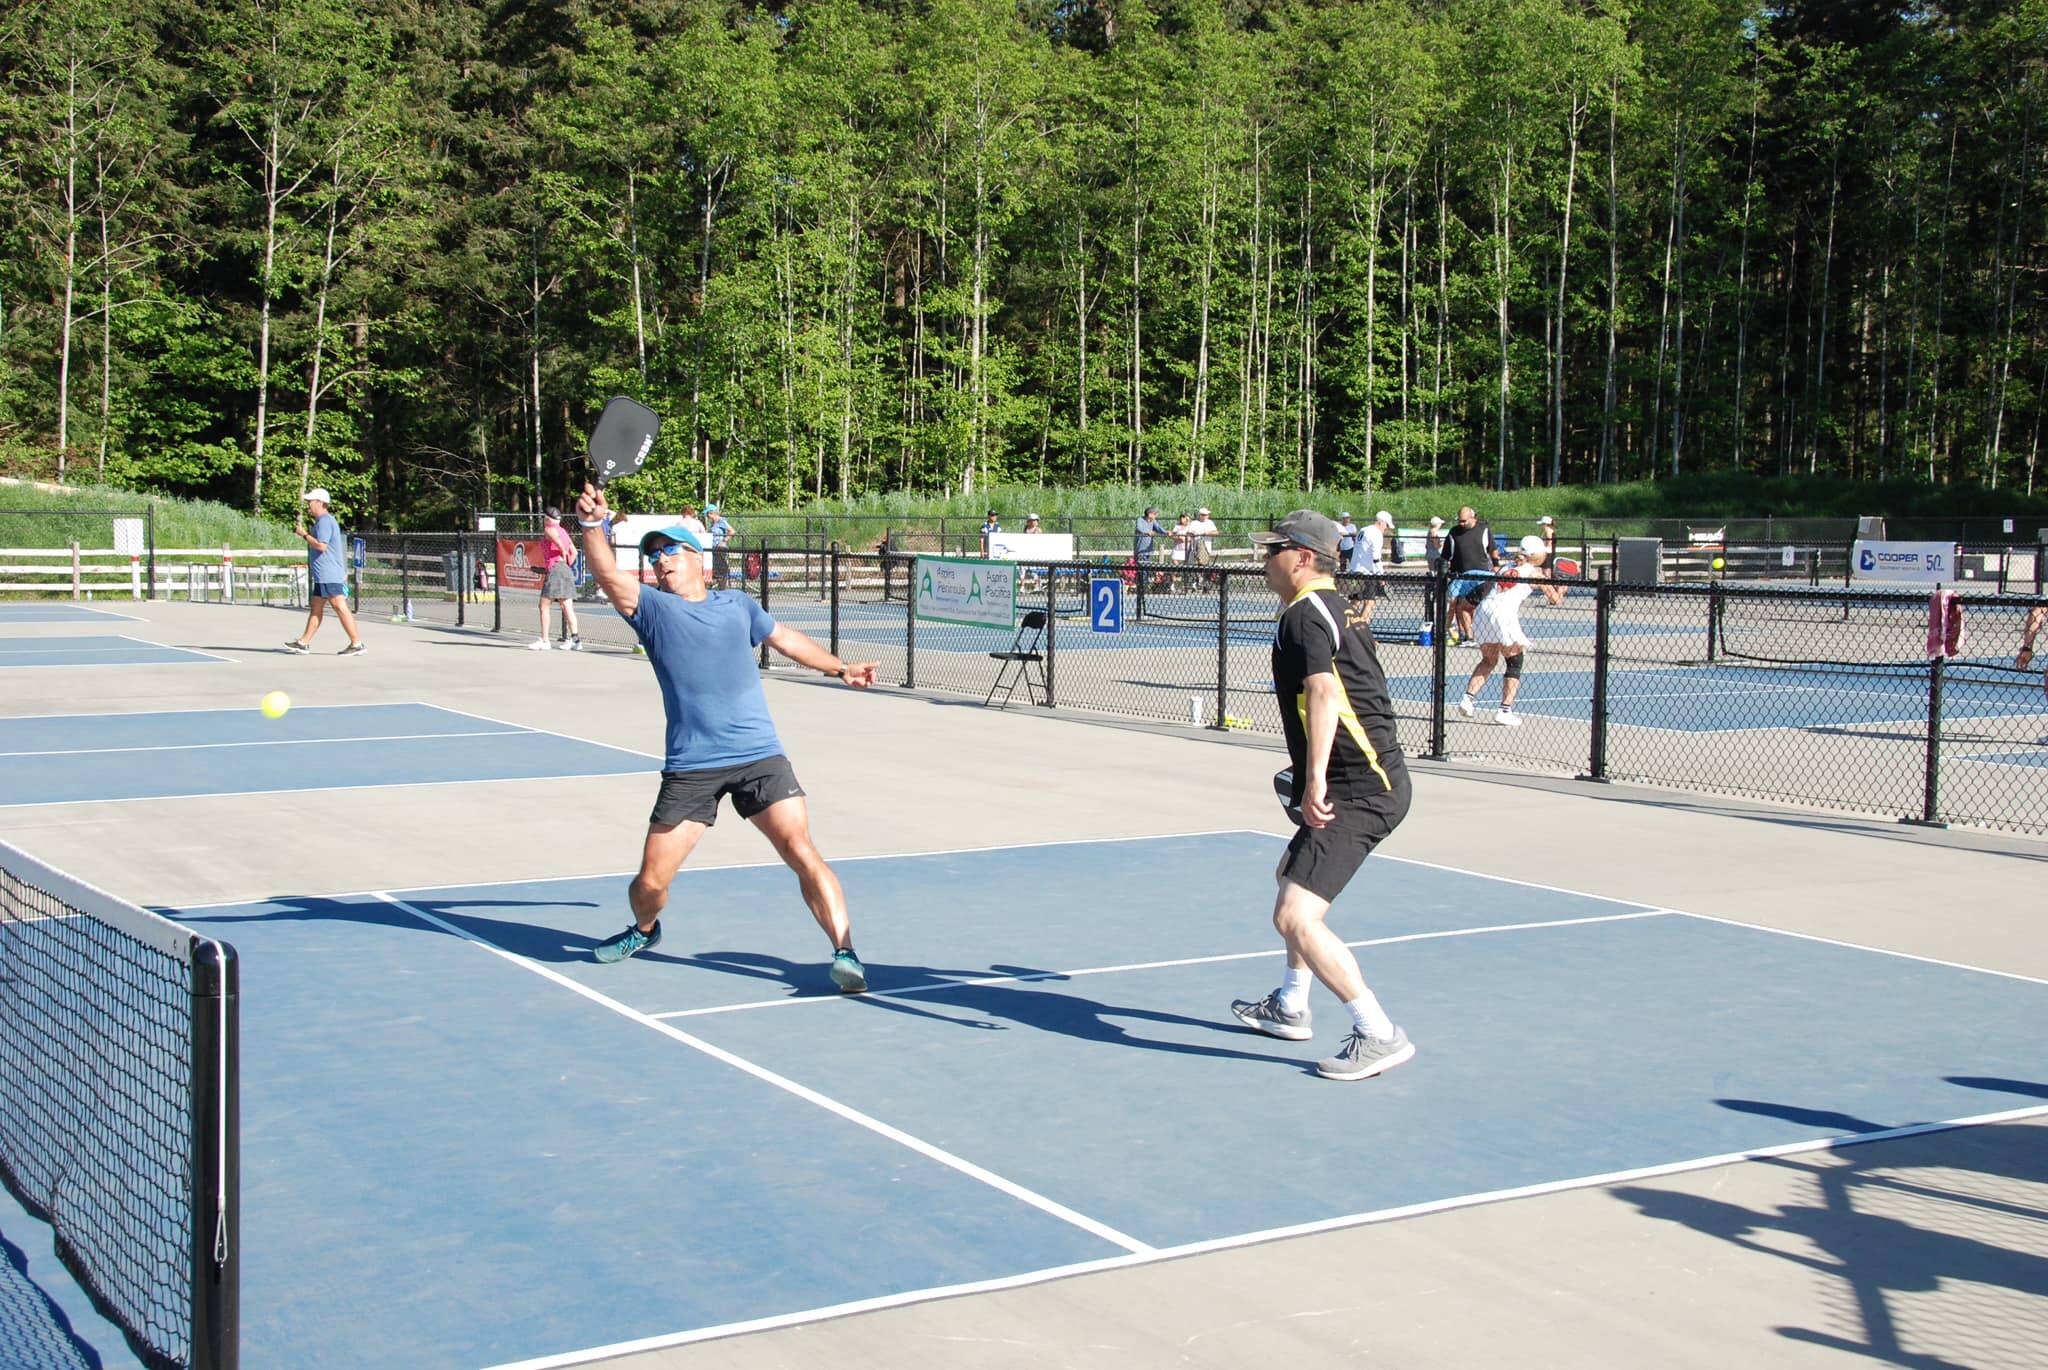 Pickleball players were out enjoying the country’s – and North America’s – fastest-growing sport at the South Surrey Athletic Park courts during recent warm weather. According to Pickleball Canada, the sport is now growing fastest among players 18-34 years old. (Surrey Pickleball Club/Facebook photo)